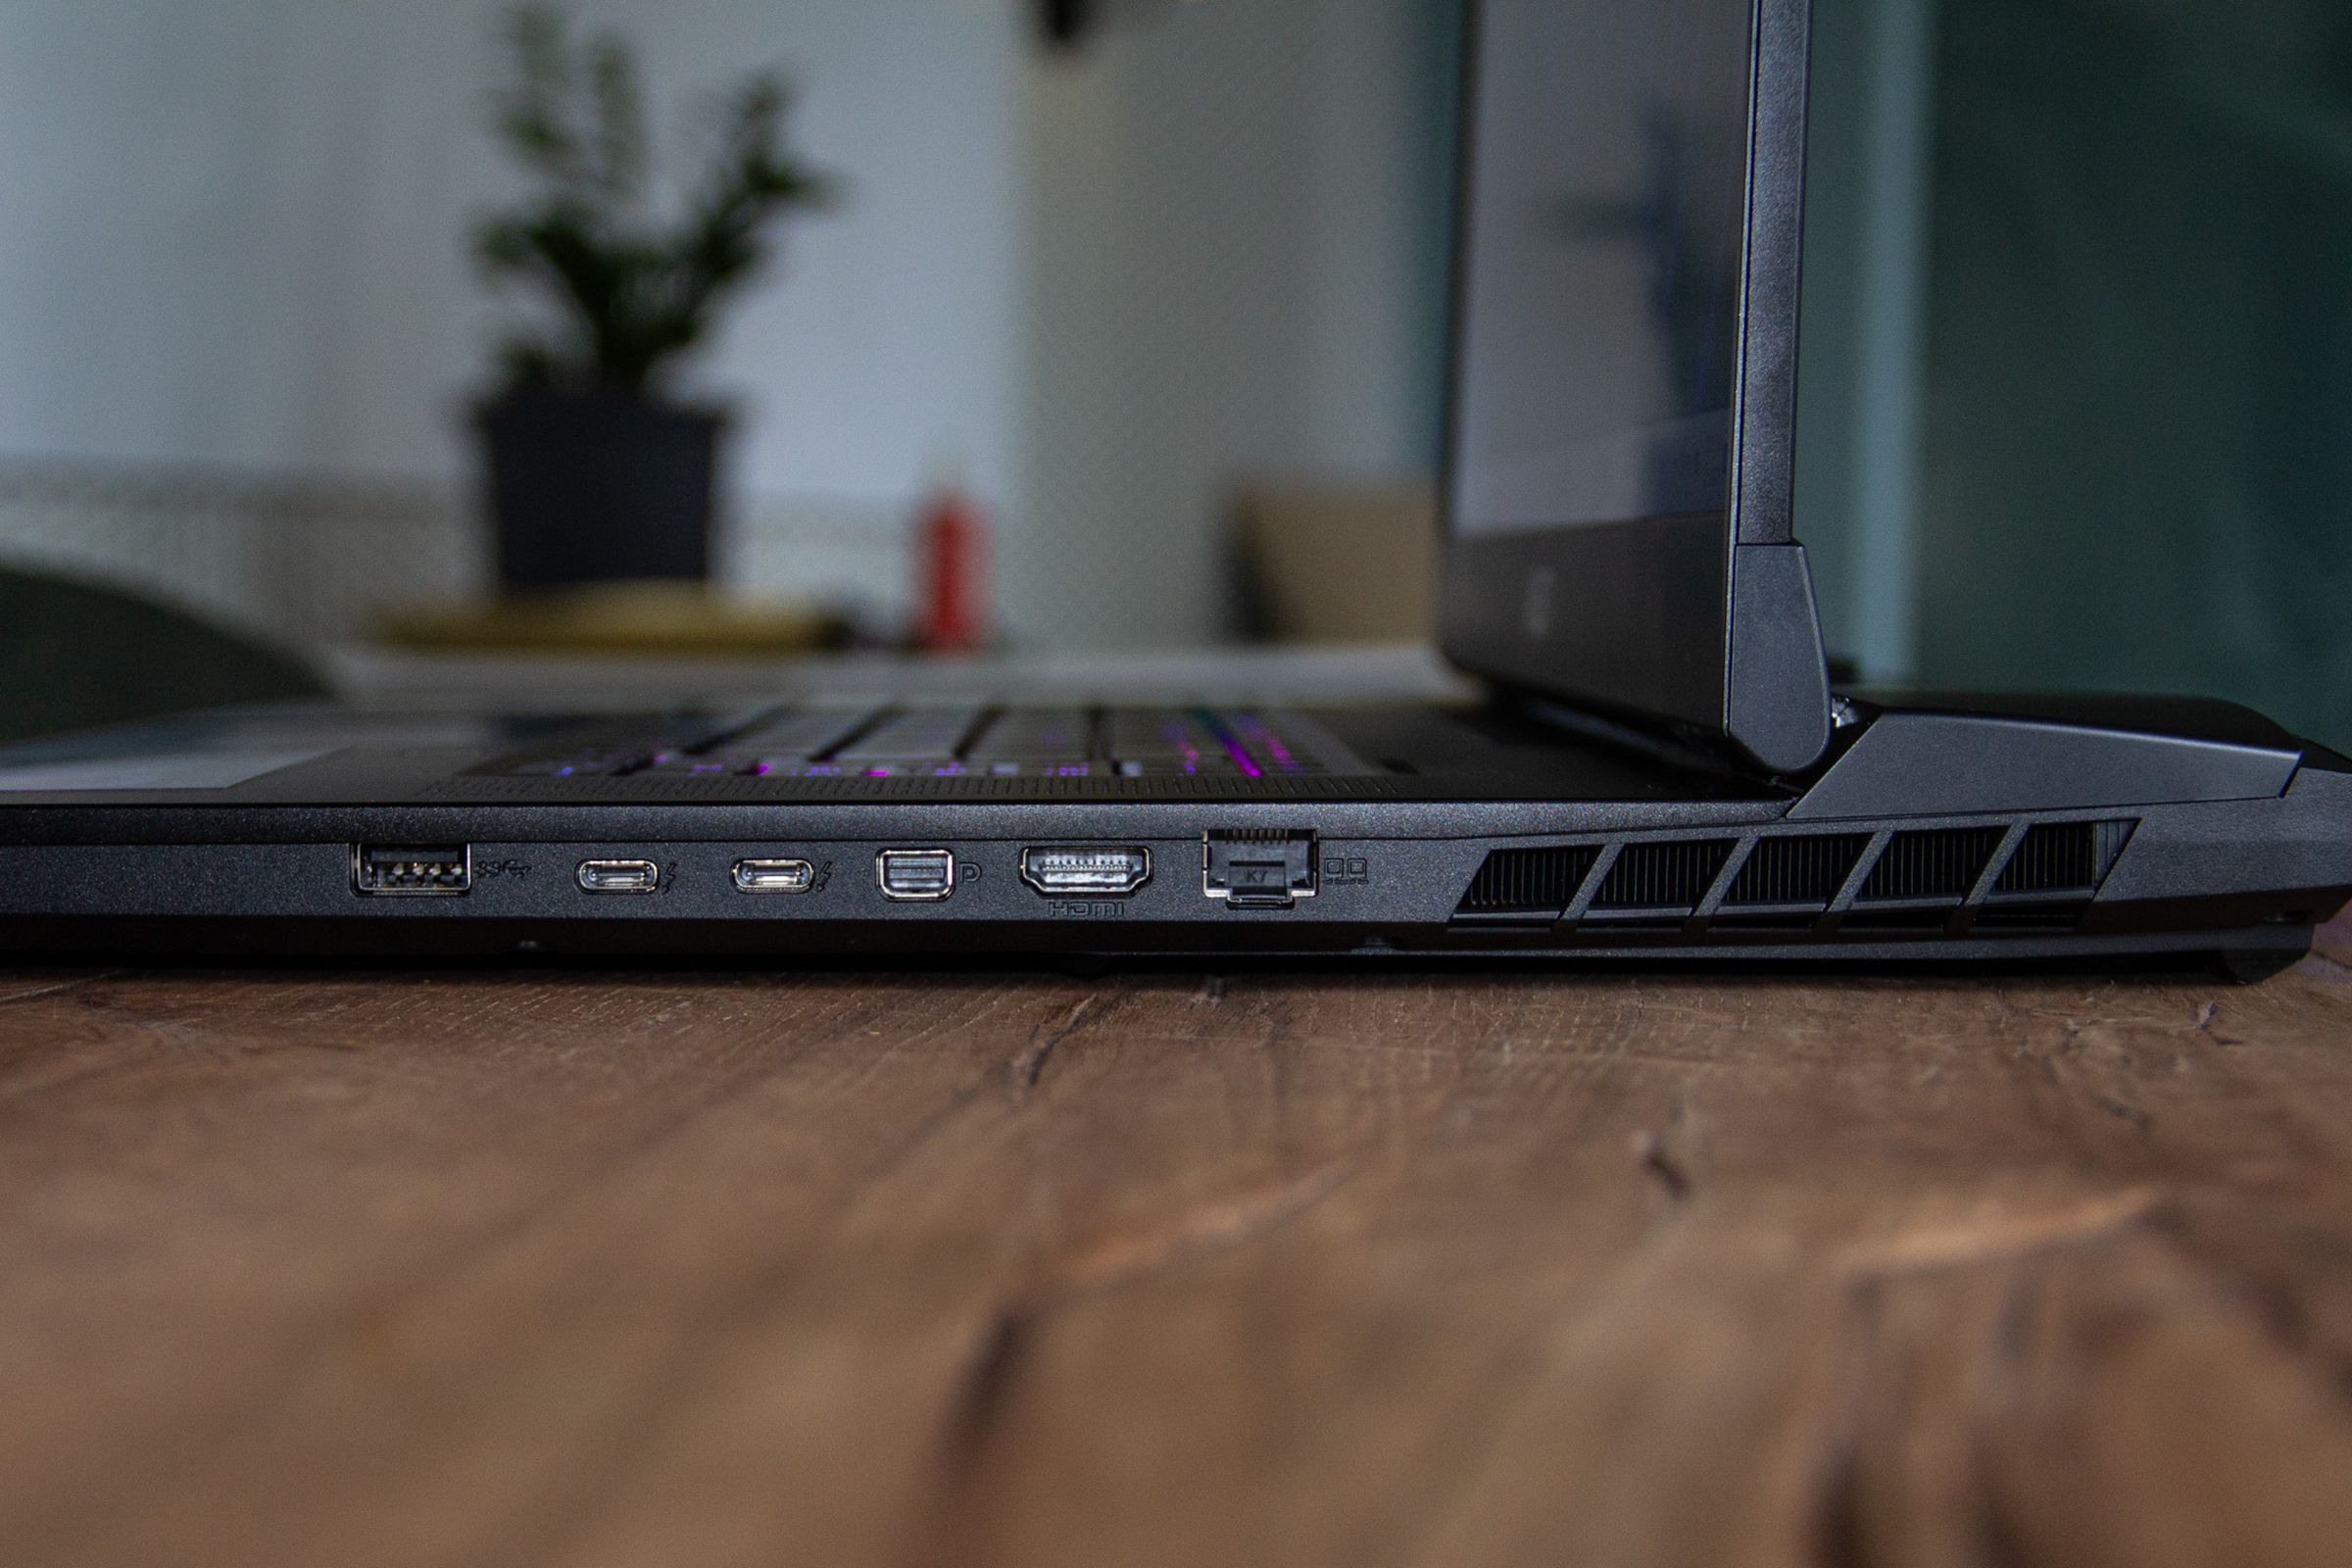 The ports on the right side of the MSI Titan GT77 HX.